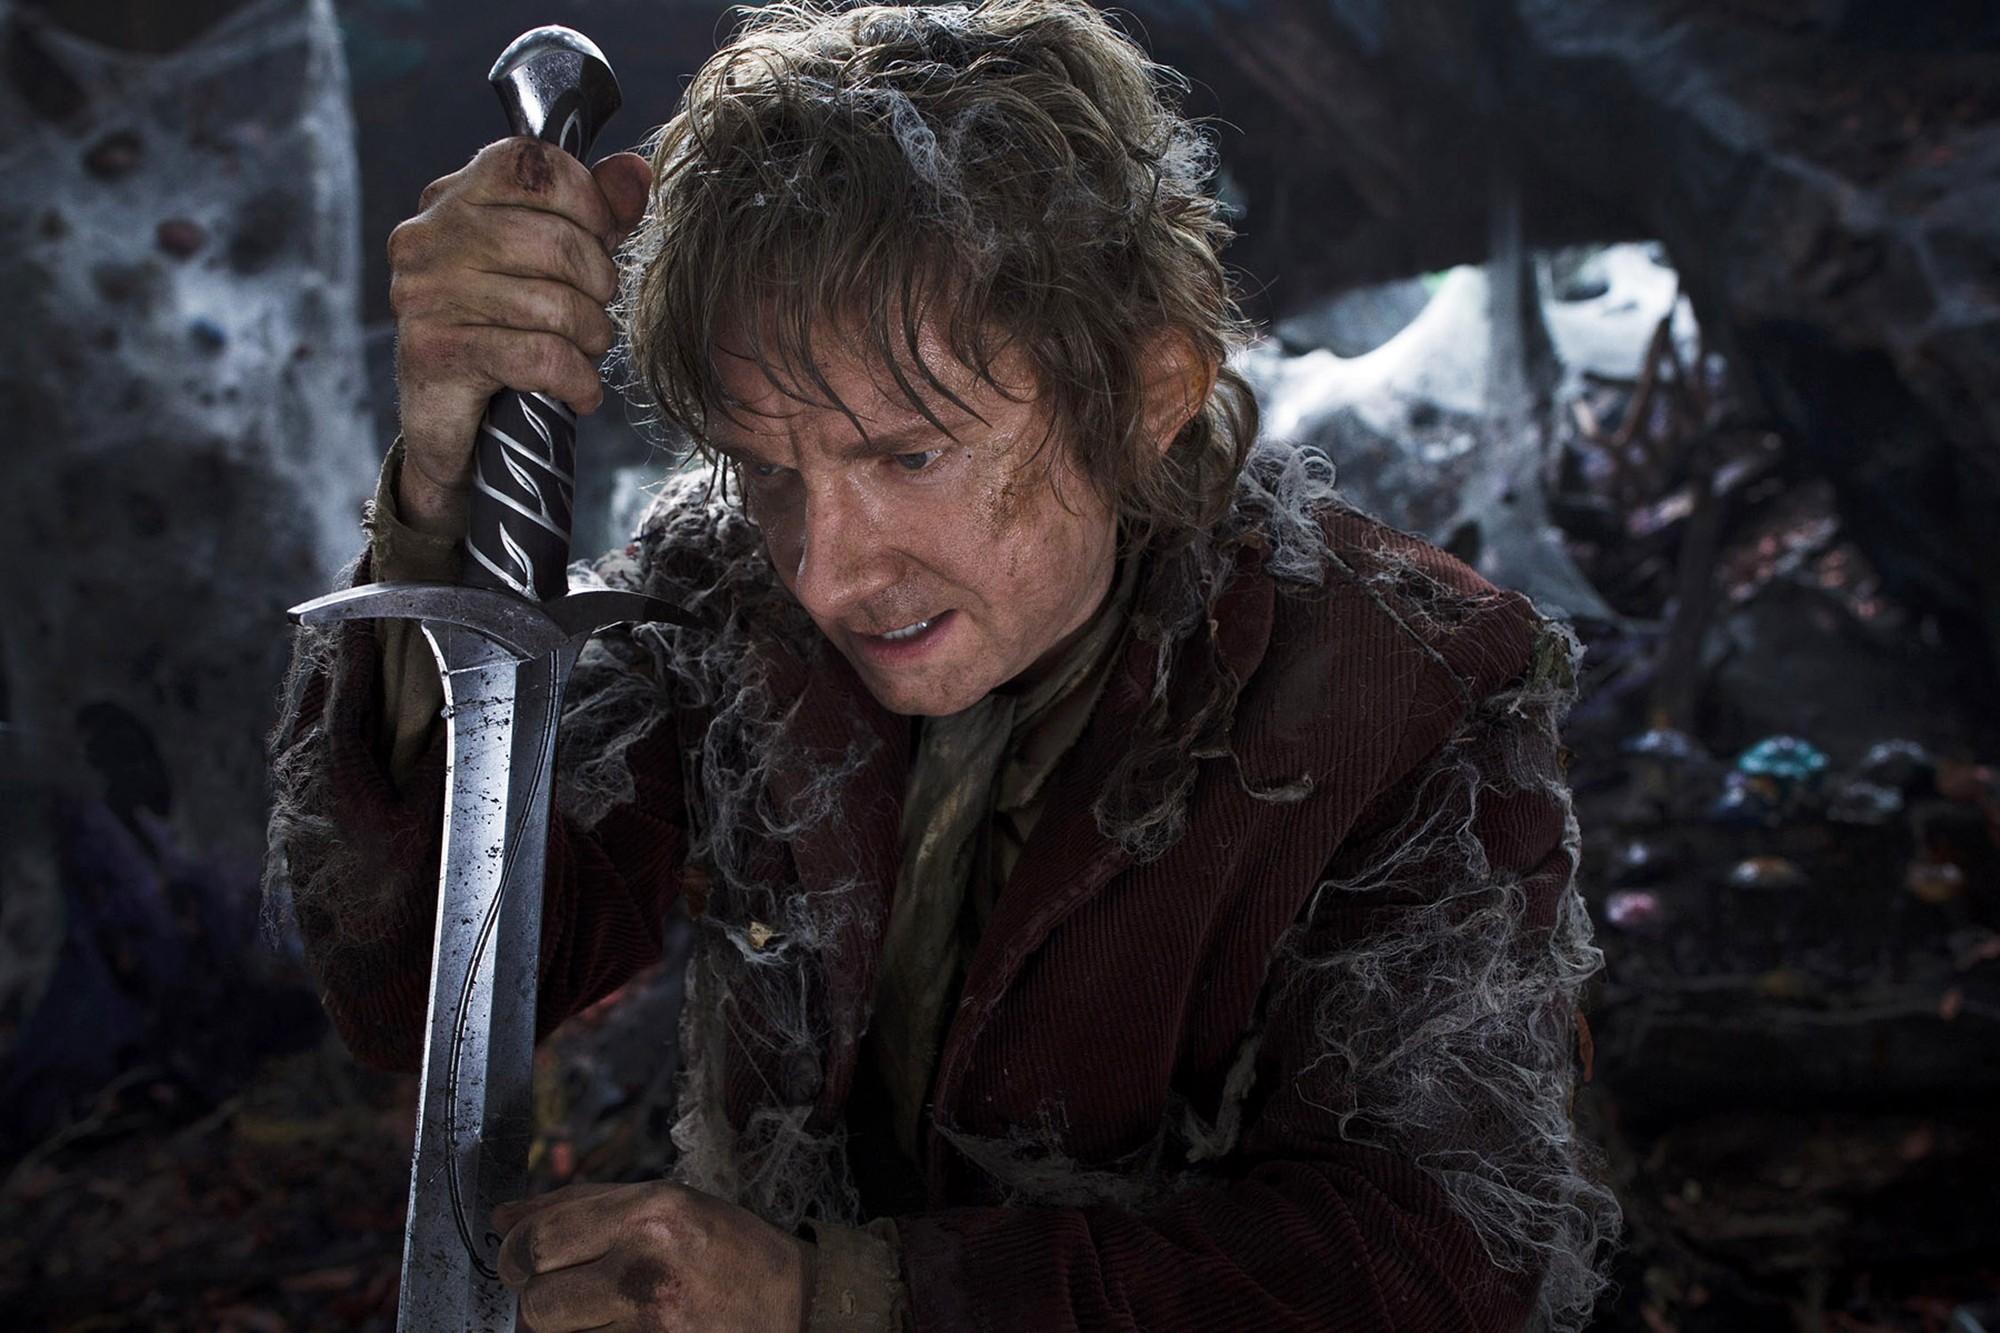 Oscar Watch: THE HOBBIT is Lovingly Bloated